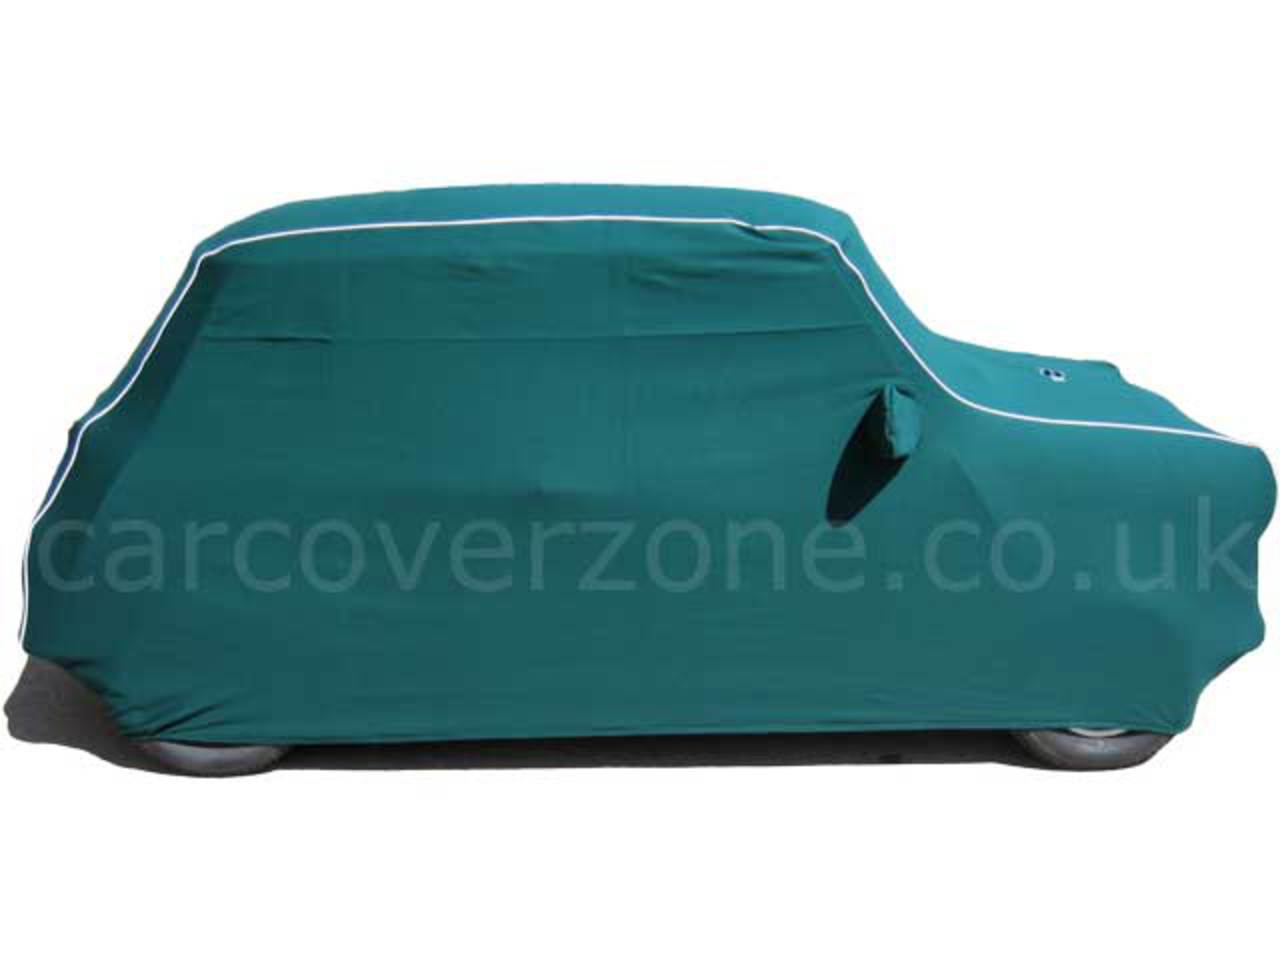 Austin Mini Saloon Car Covers Fitted Indoor and Outdoor from ...